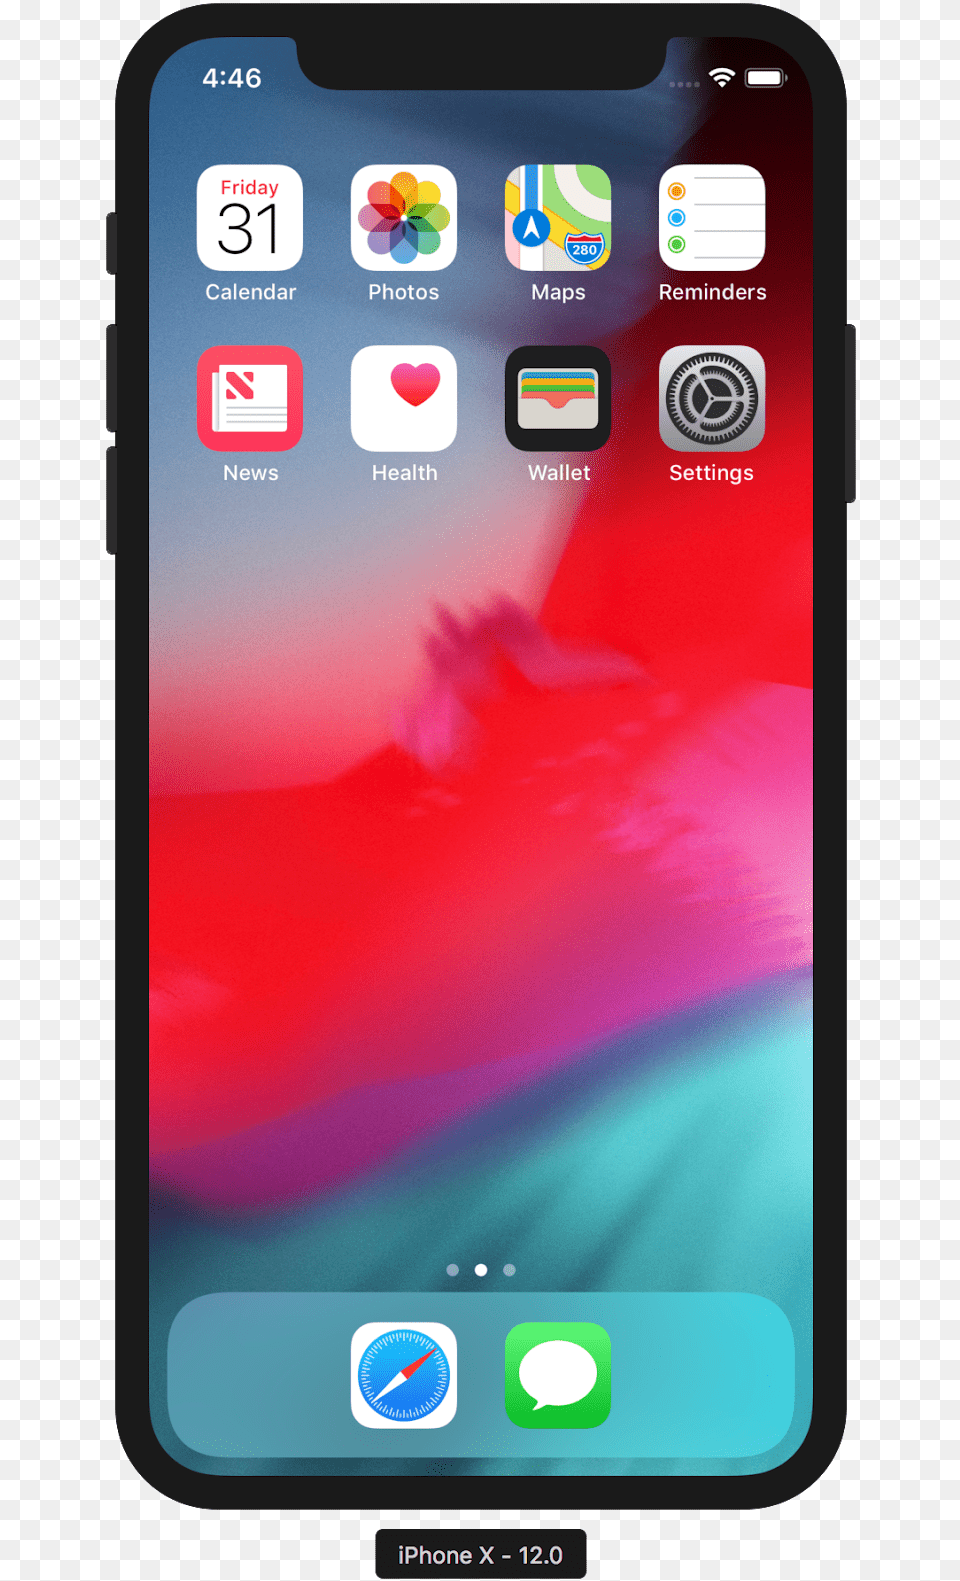 The Iphone X Home Screen In Simulator With 1792 X 828 Resolution, Electronics, Mobile Phone, Phone Png